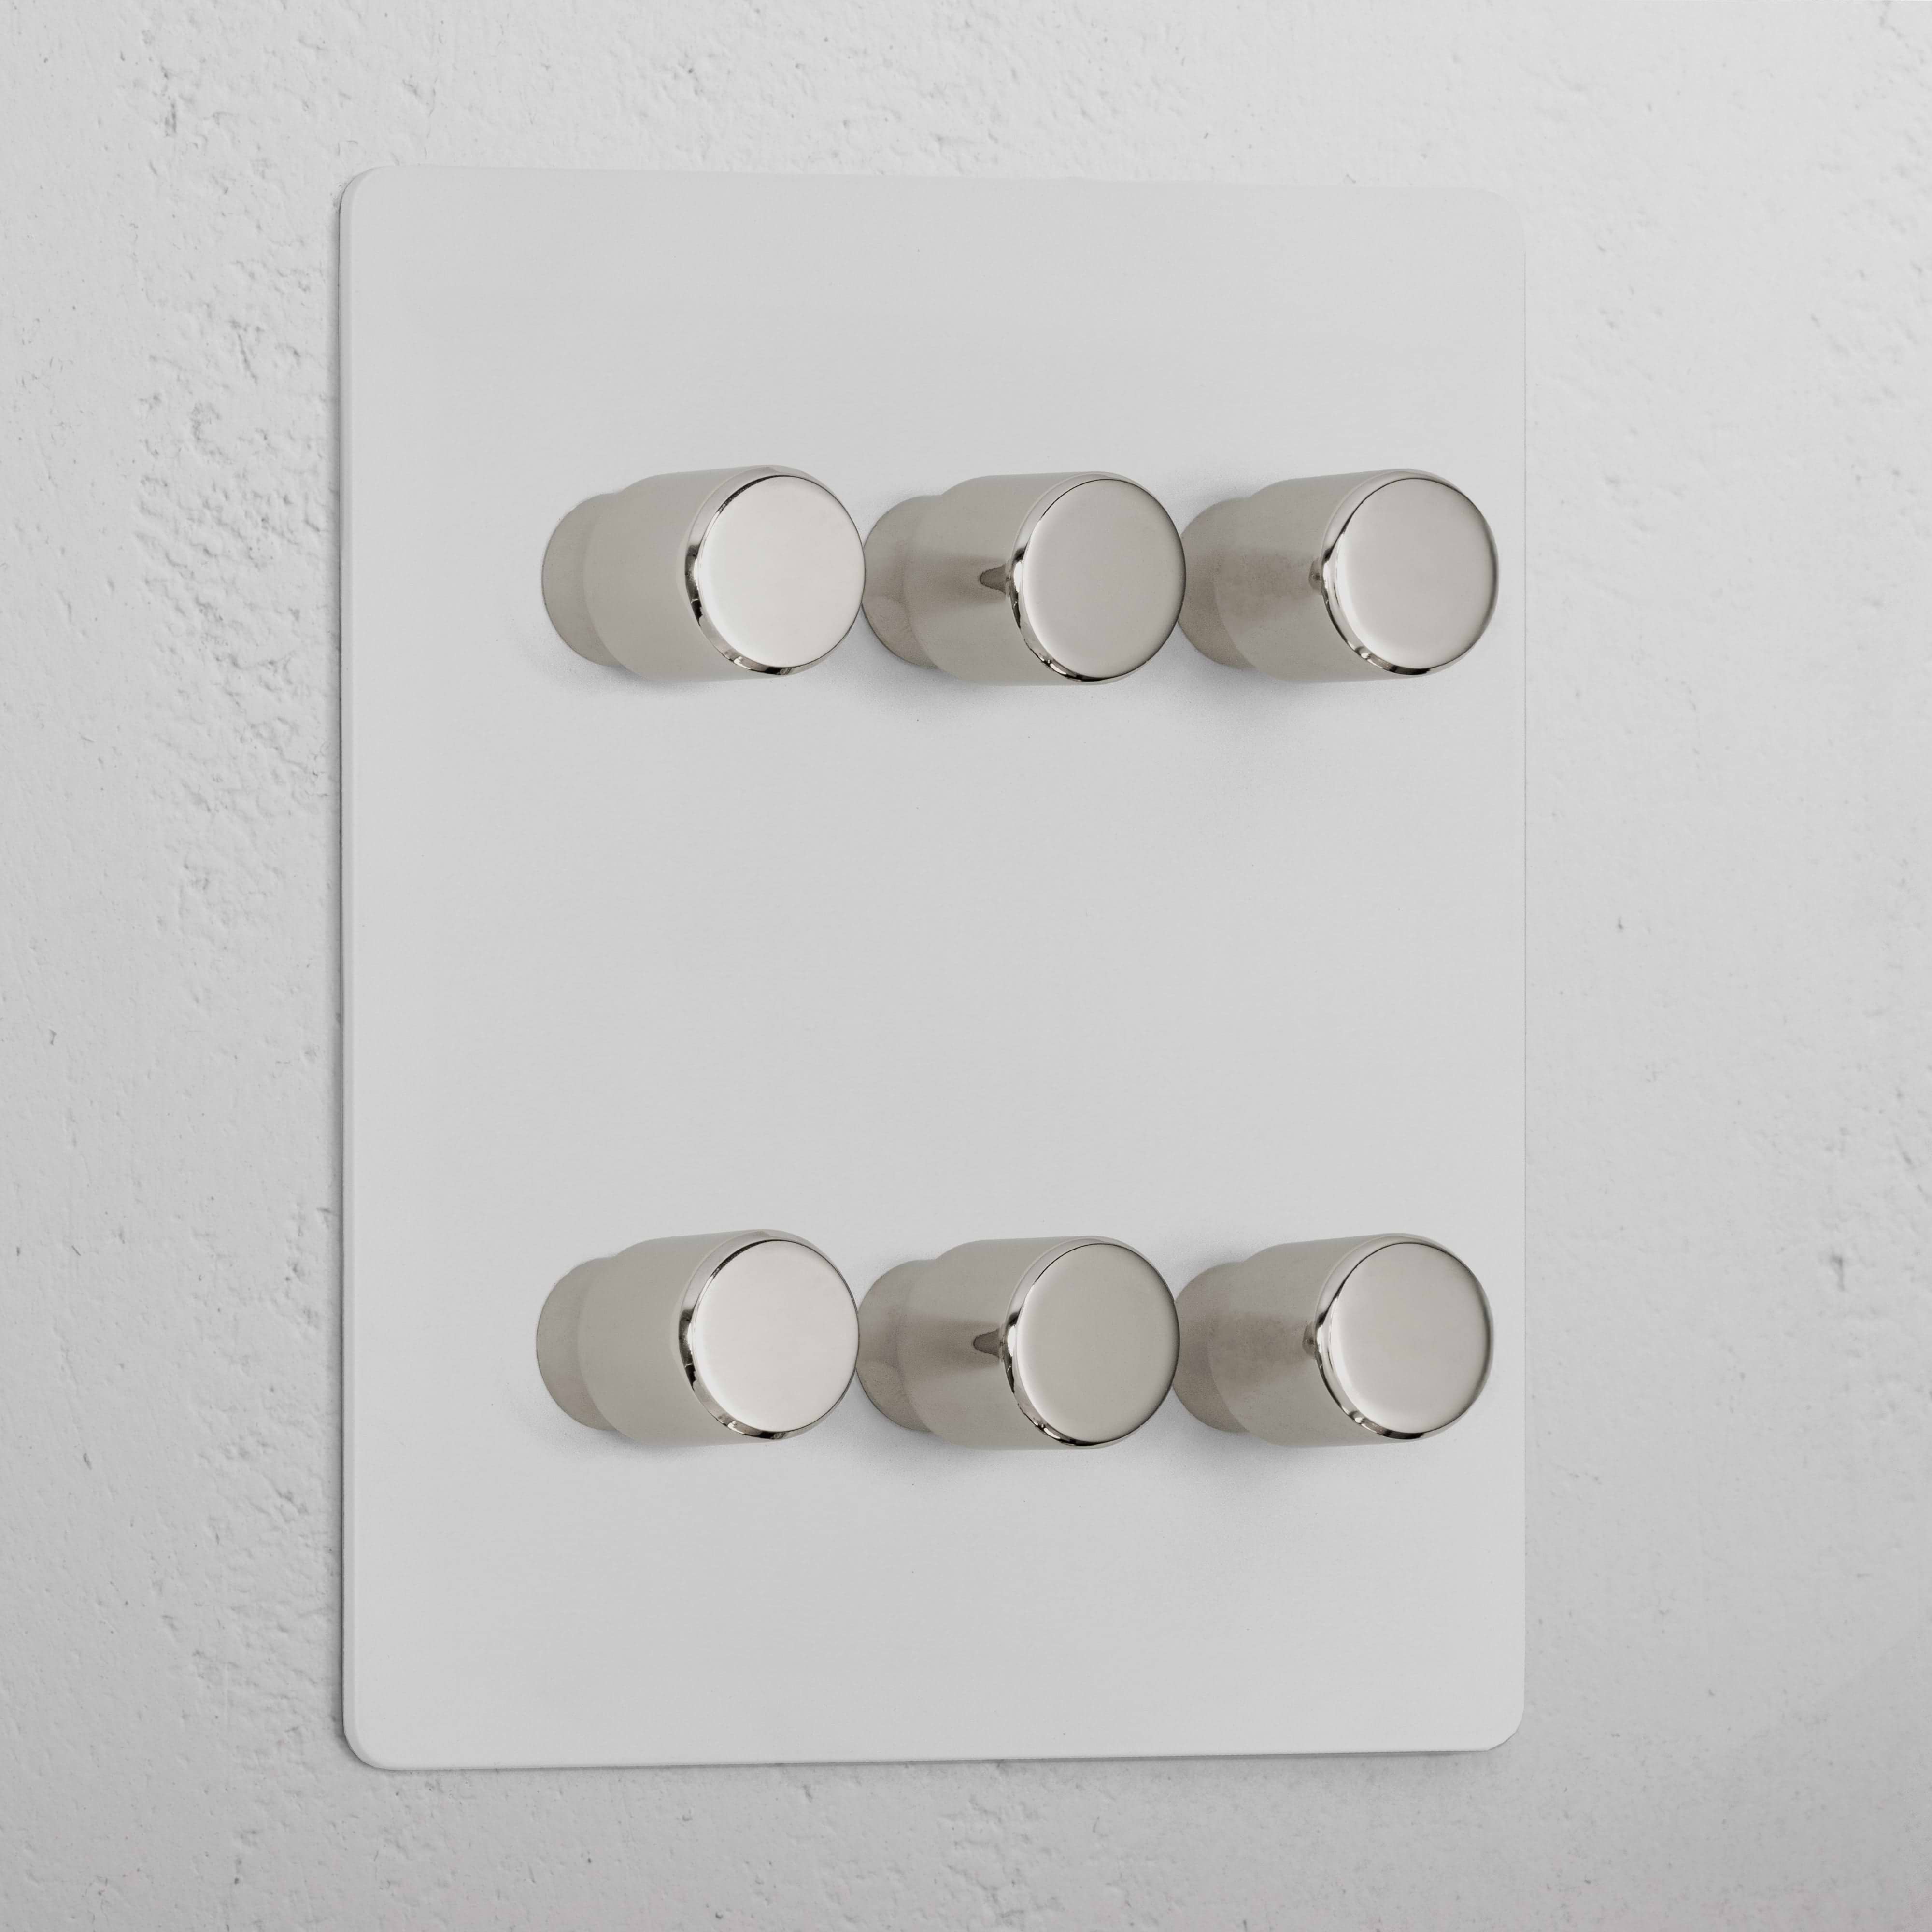 6G Dimmer Switch - Paintable Polished Nickel